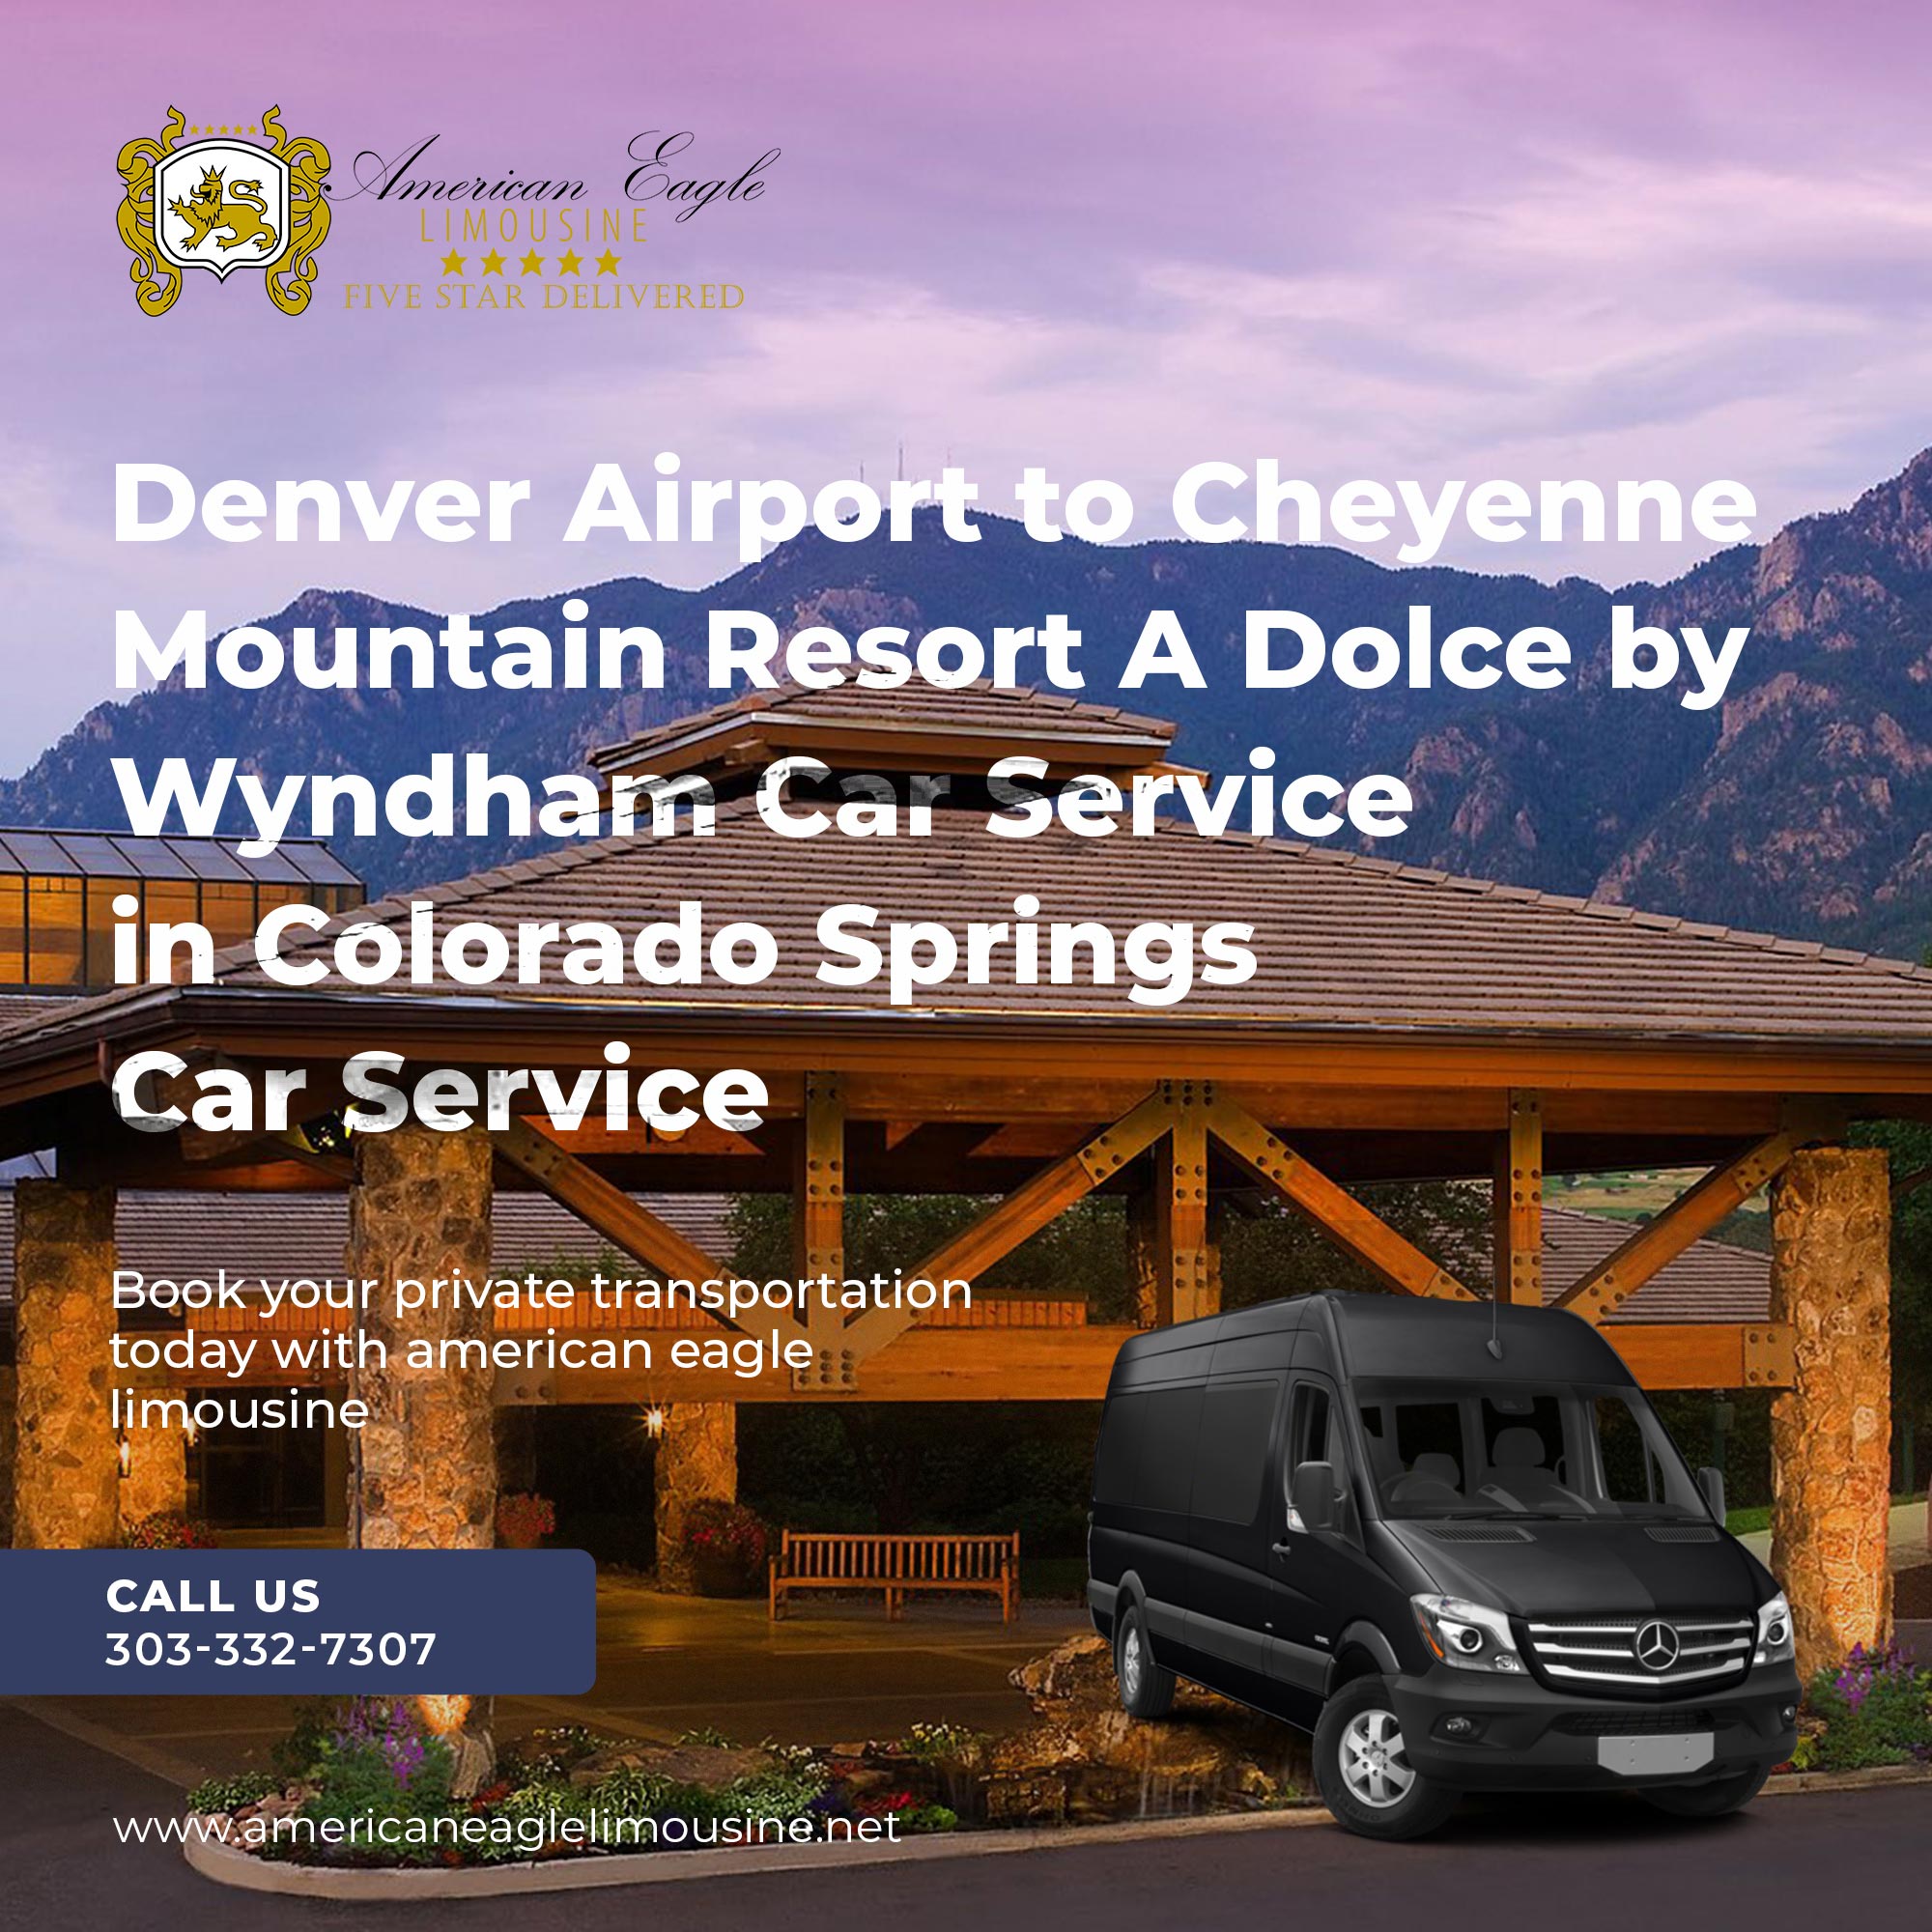 You are currently viewing The cheapest way to get from Denver Airport (DEN) to Cheyenne Mountain Resort, A Dolce by Wyndham in Colorado Springs Private Shuttle.